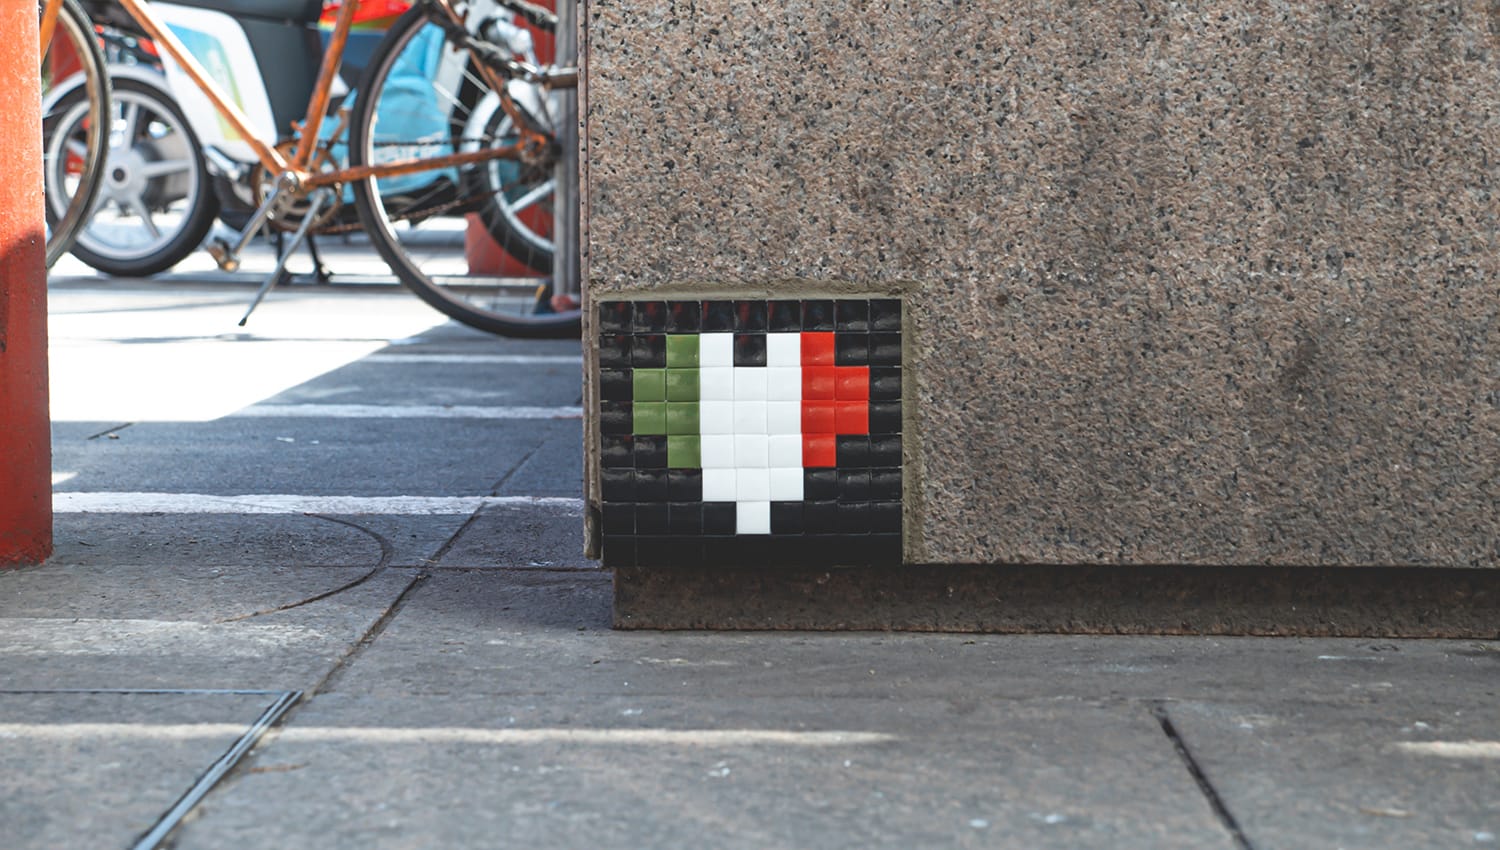 Mosaic 5170  by the artist Técinka captured by Rabot in Milano Italy